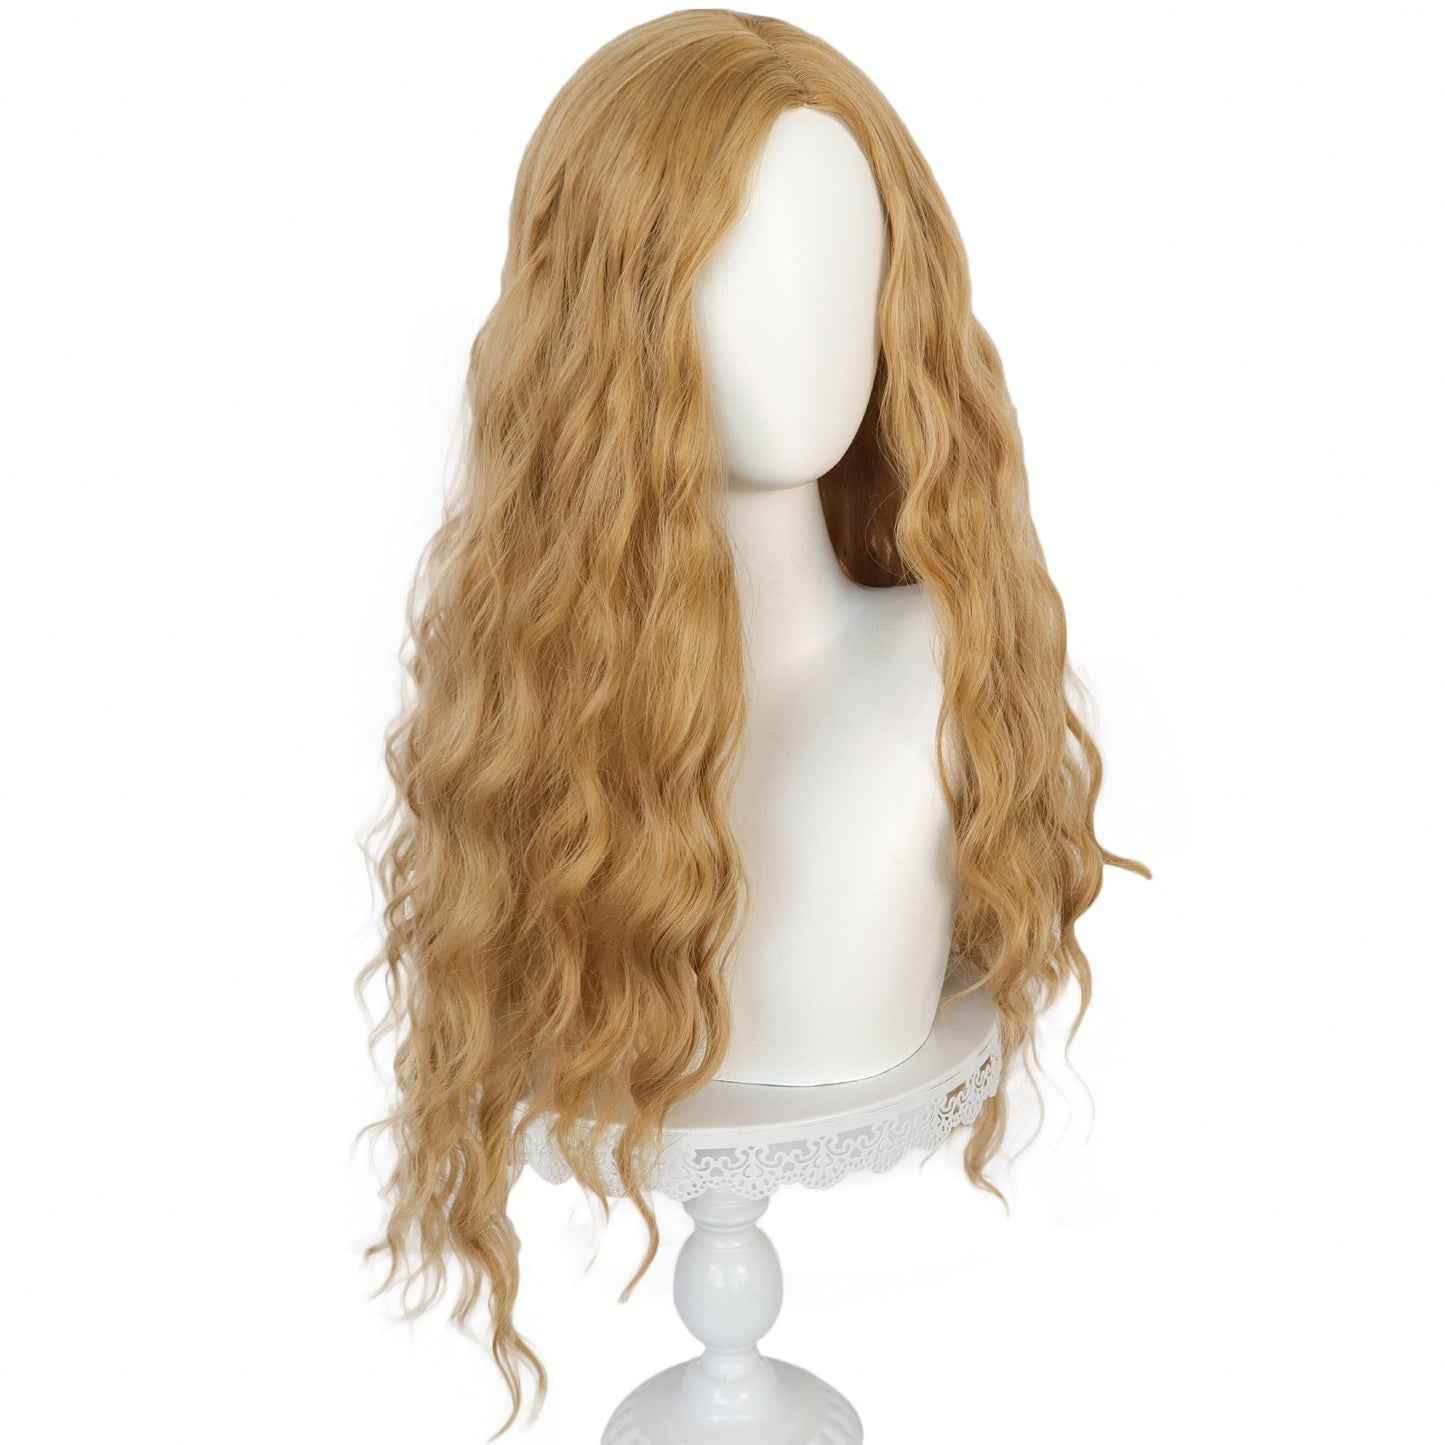 M3gan Kids Cosplay Costume with Wig